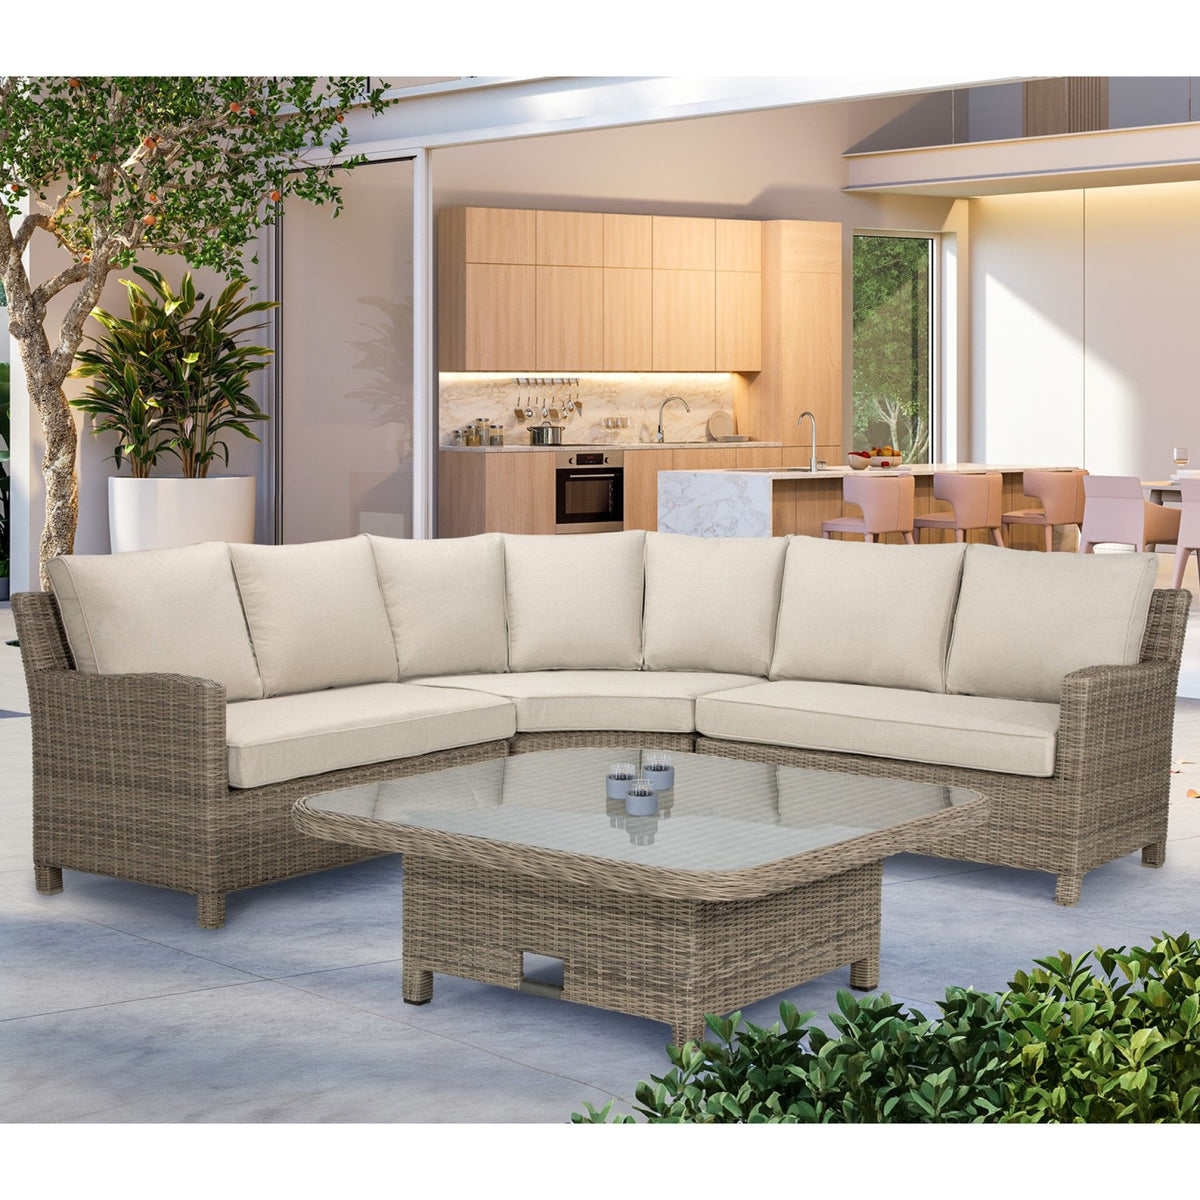 Kettler Palma Signature Grande Oyster Corner Sofa Set with High Low Glass Top Table